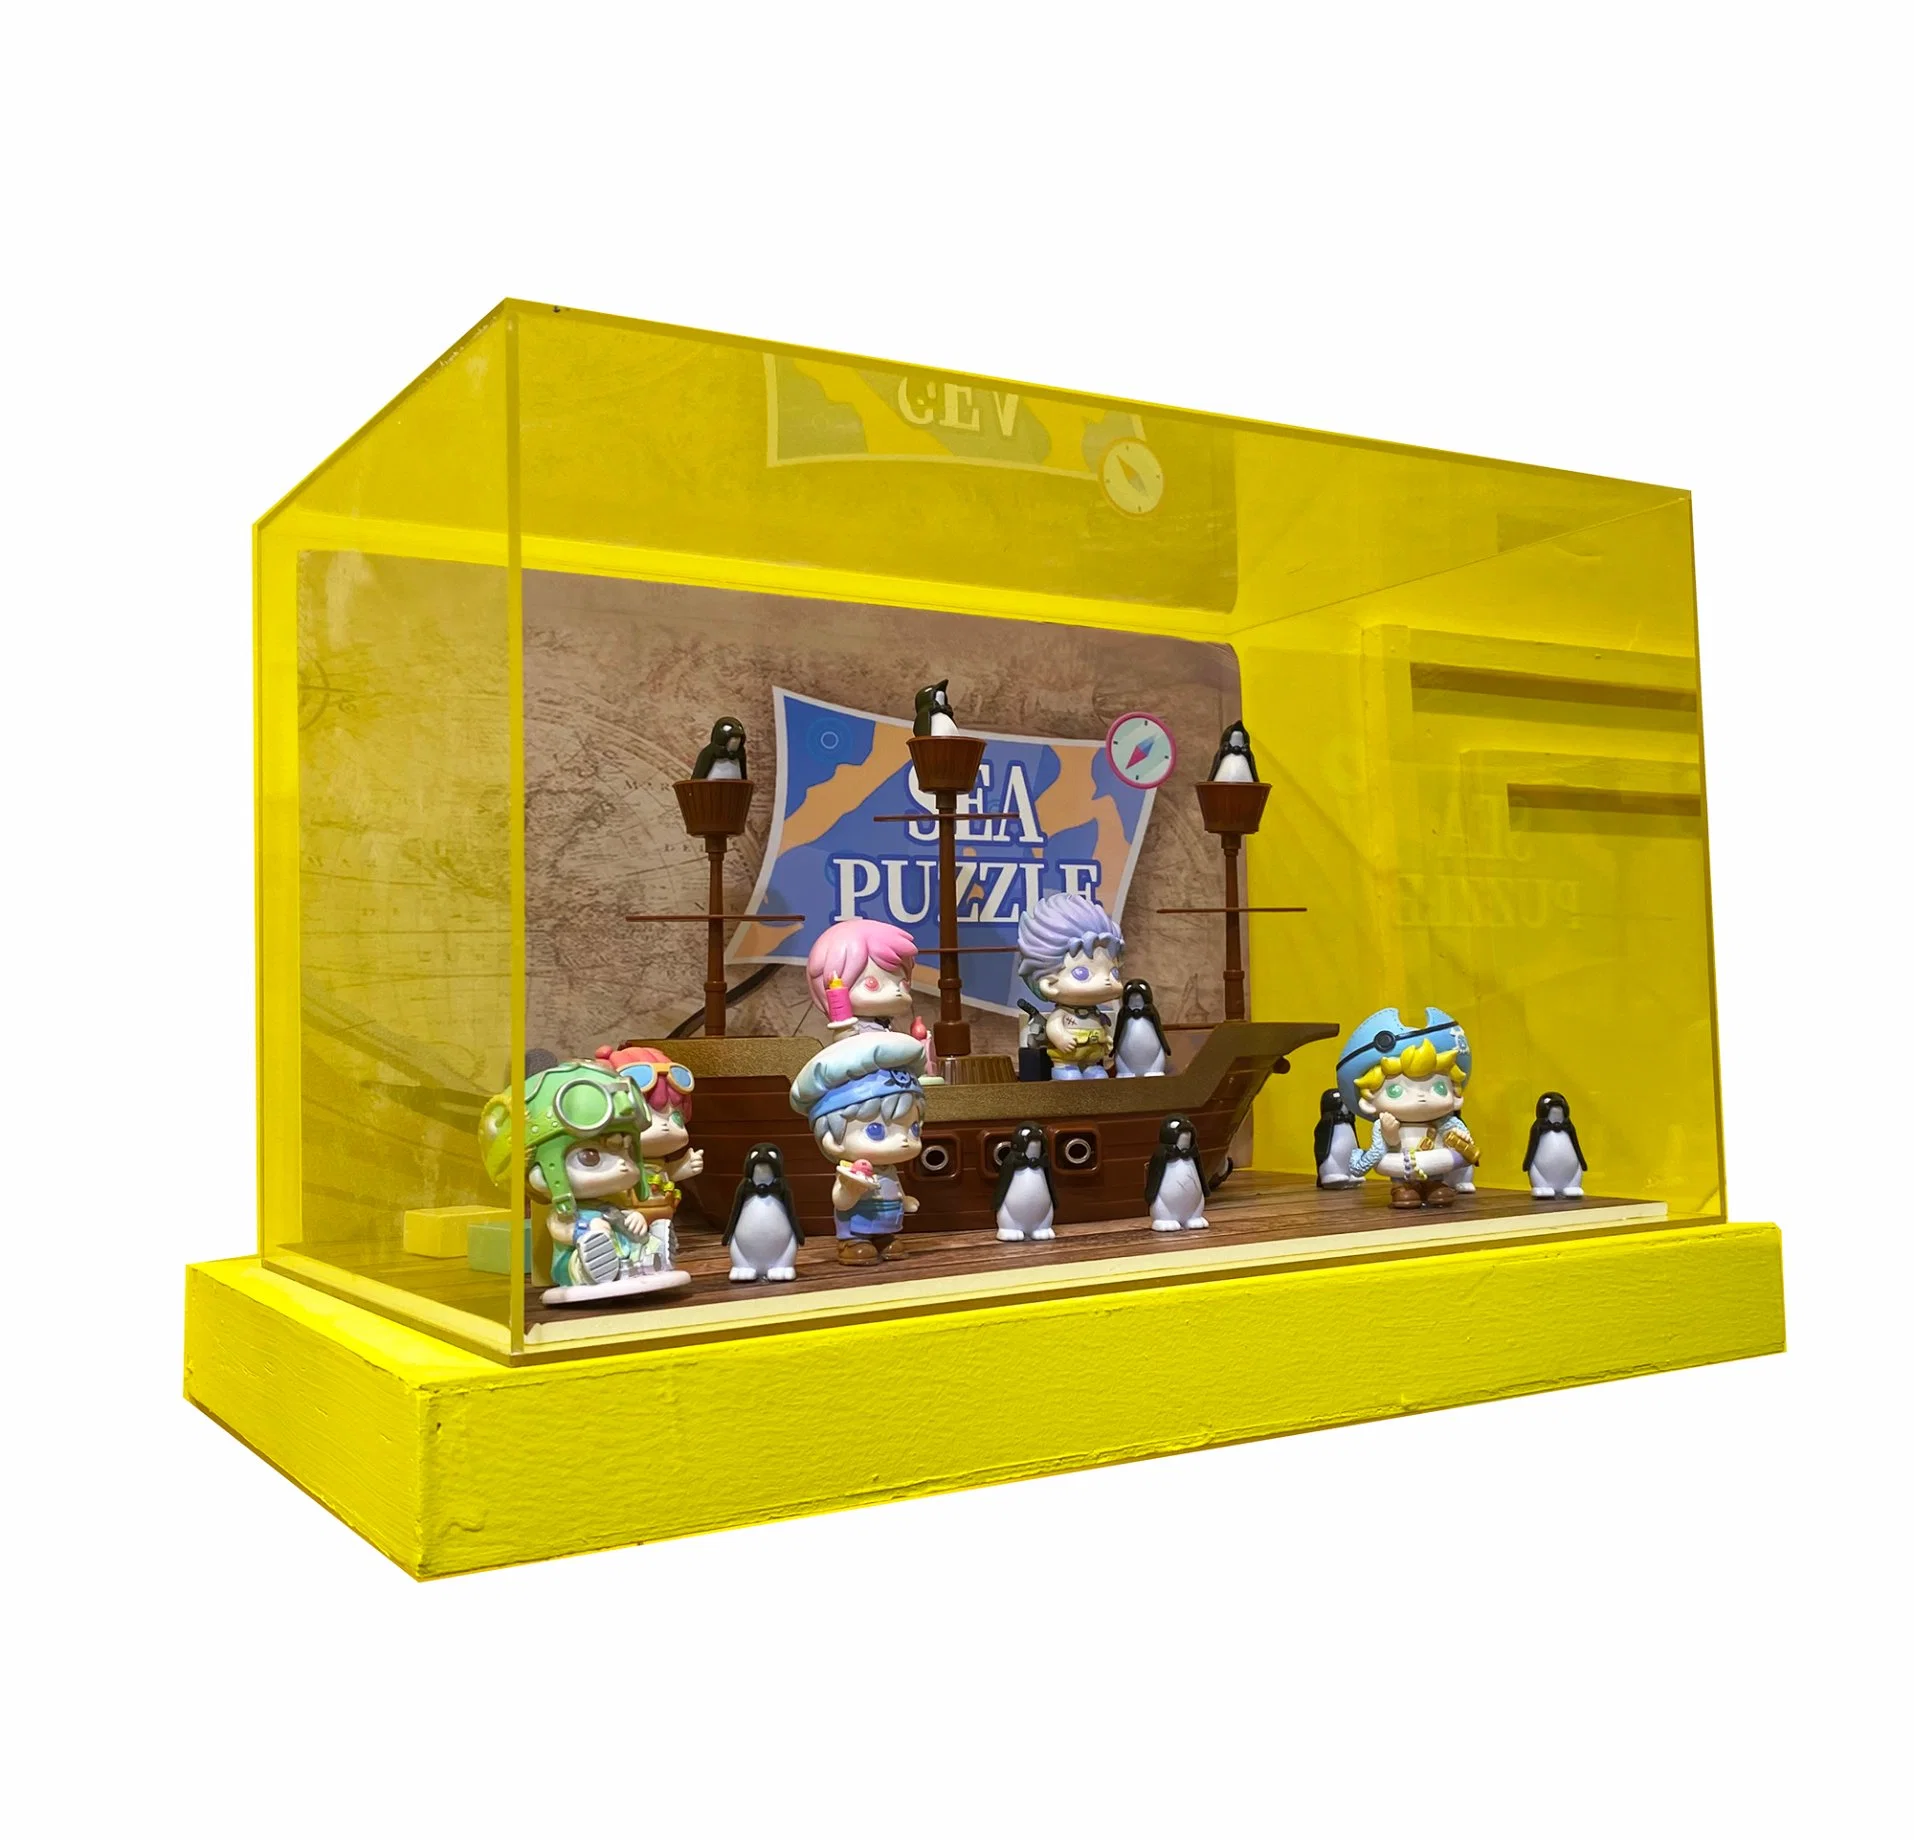 Acrylic Transparent Display Window Box with Base for Products Branding